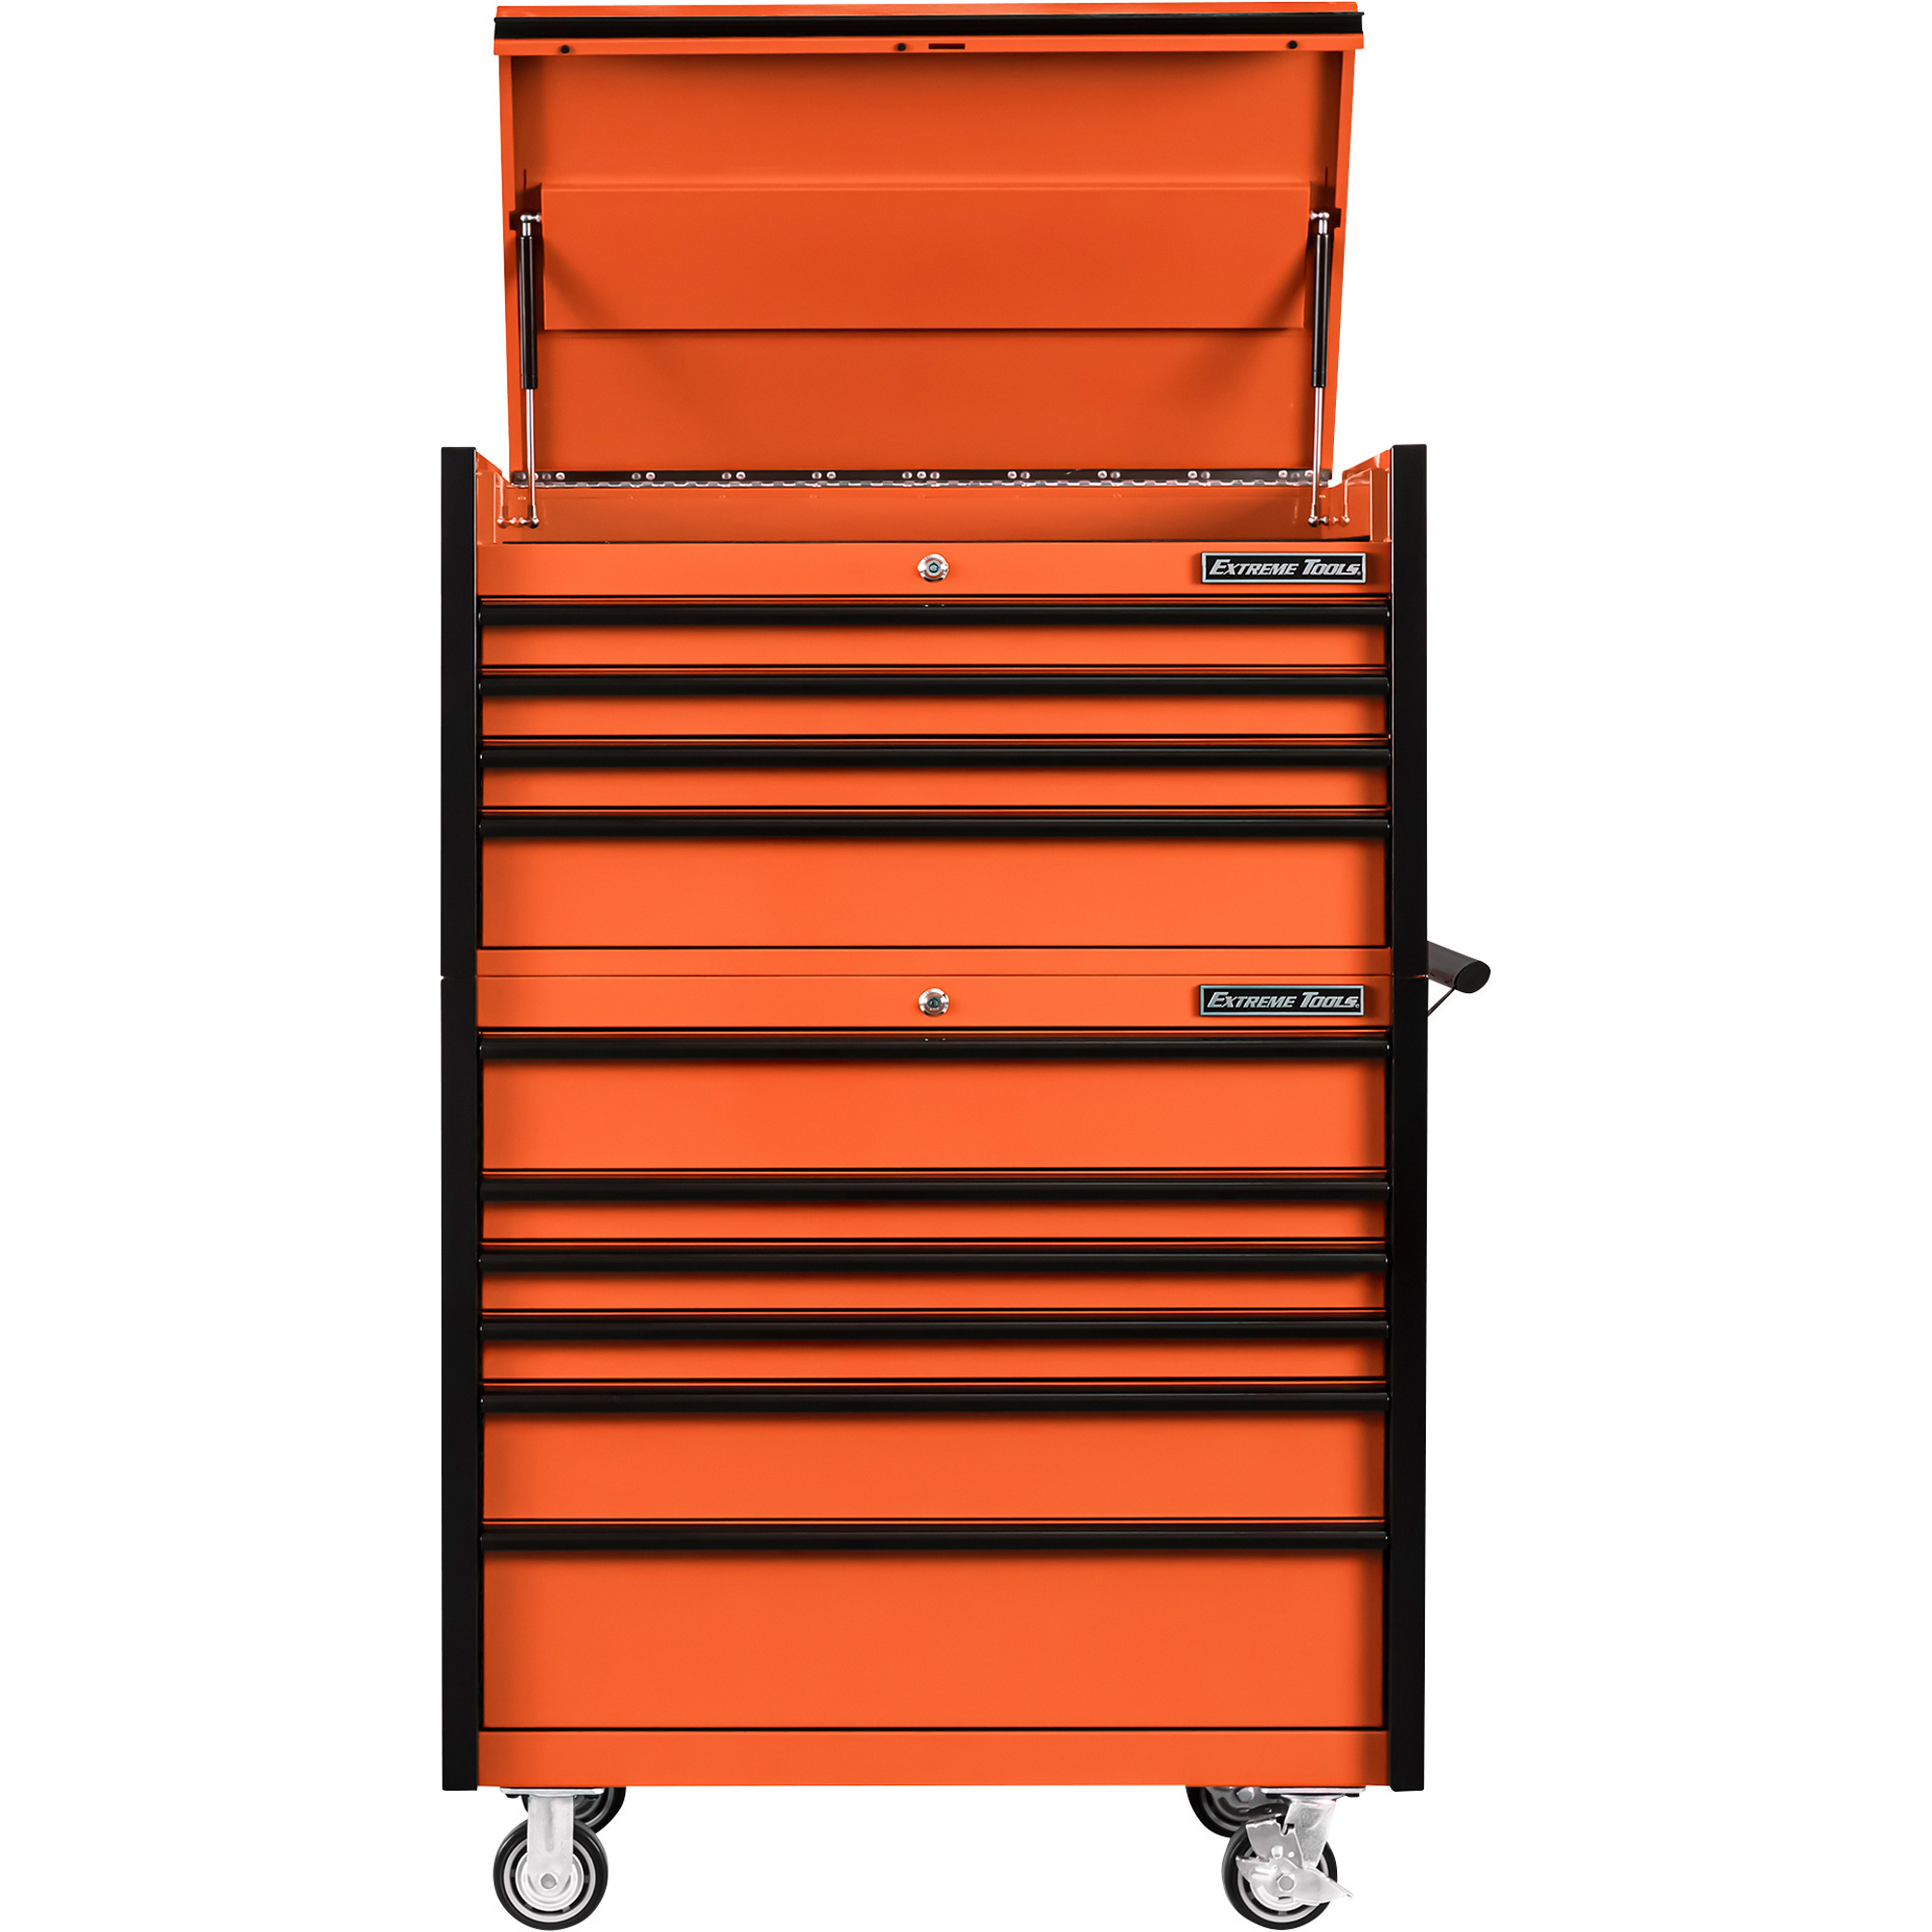 4-Drawer Top Chest/6-Drawer Roller Cabinet Combo — 41Inch W x 25Inch D x 64Inch H, Orange/Black, Model - Extreme Tools DX4110CROK